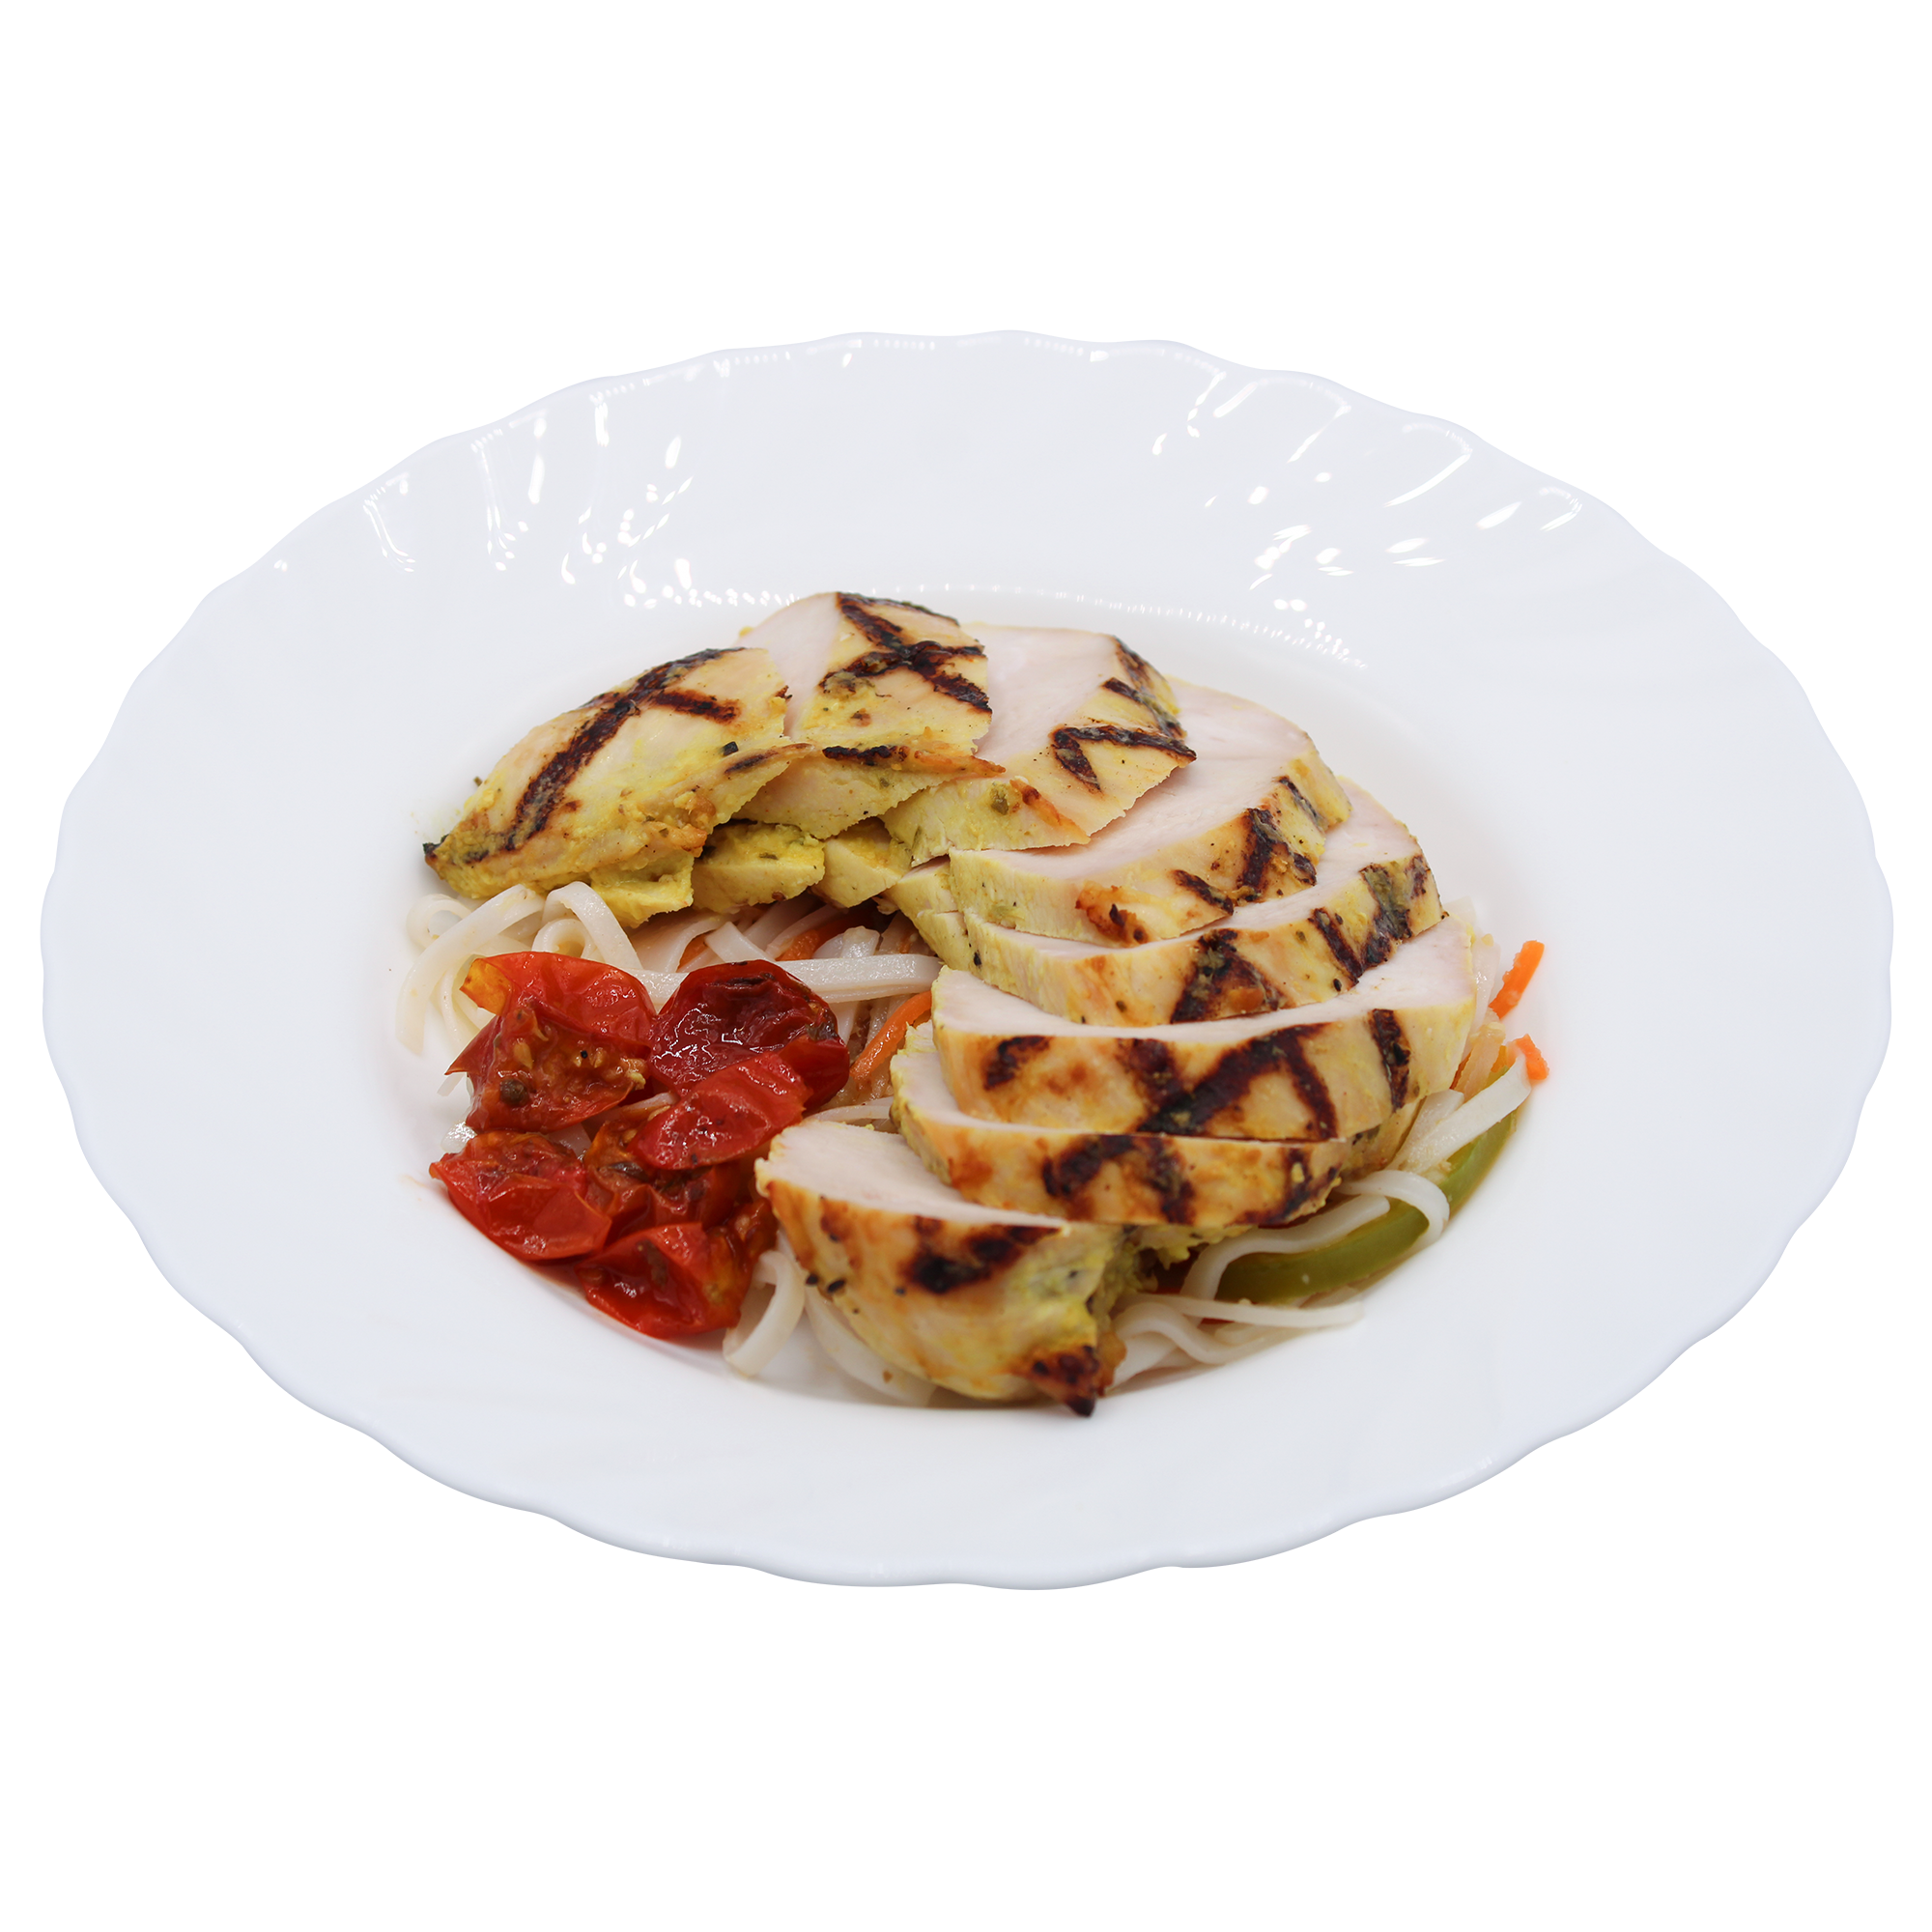 Grilled Chicken Breast On A Bed Of Marinated Rice Noodles